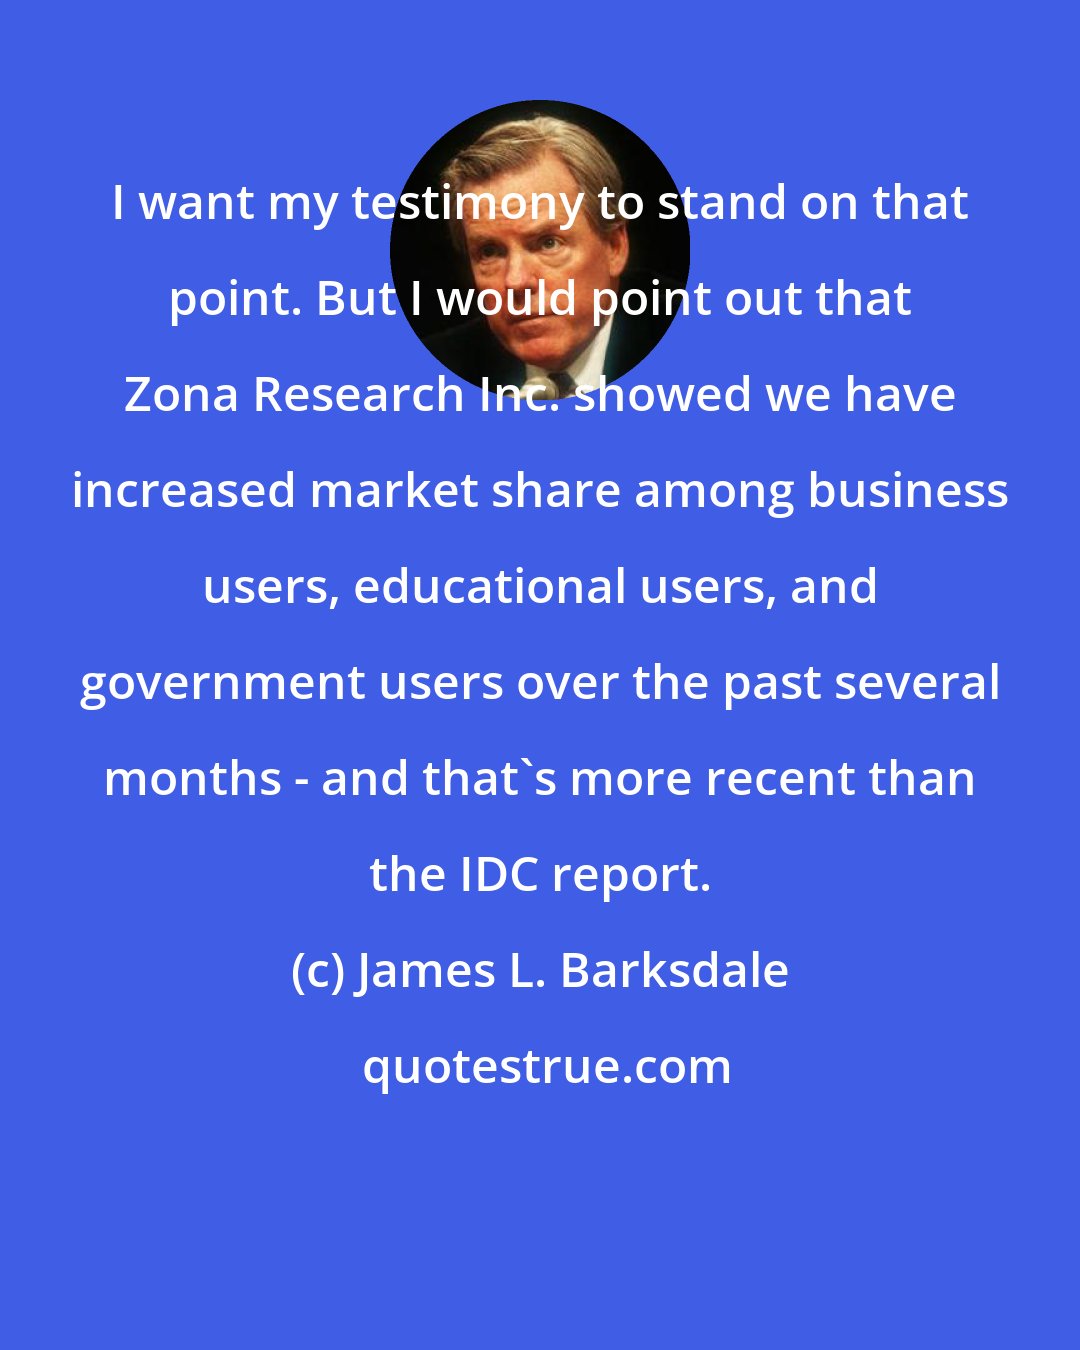 James L. Barksdale: I want my testimony to stand on that point. But I would point out that Zona Research Inc. showed we have increased market share among business users, educational users, and government users over the past several months - and that's more recent than the IDC report.